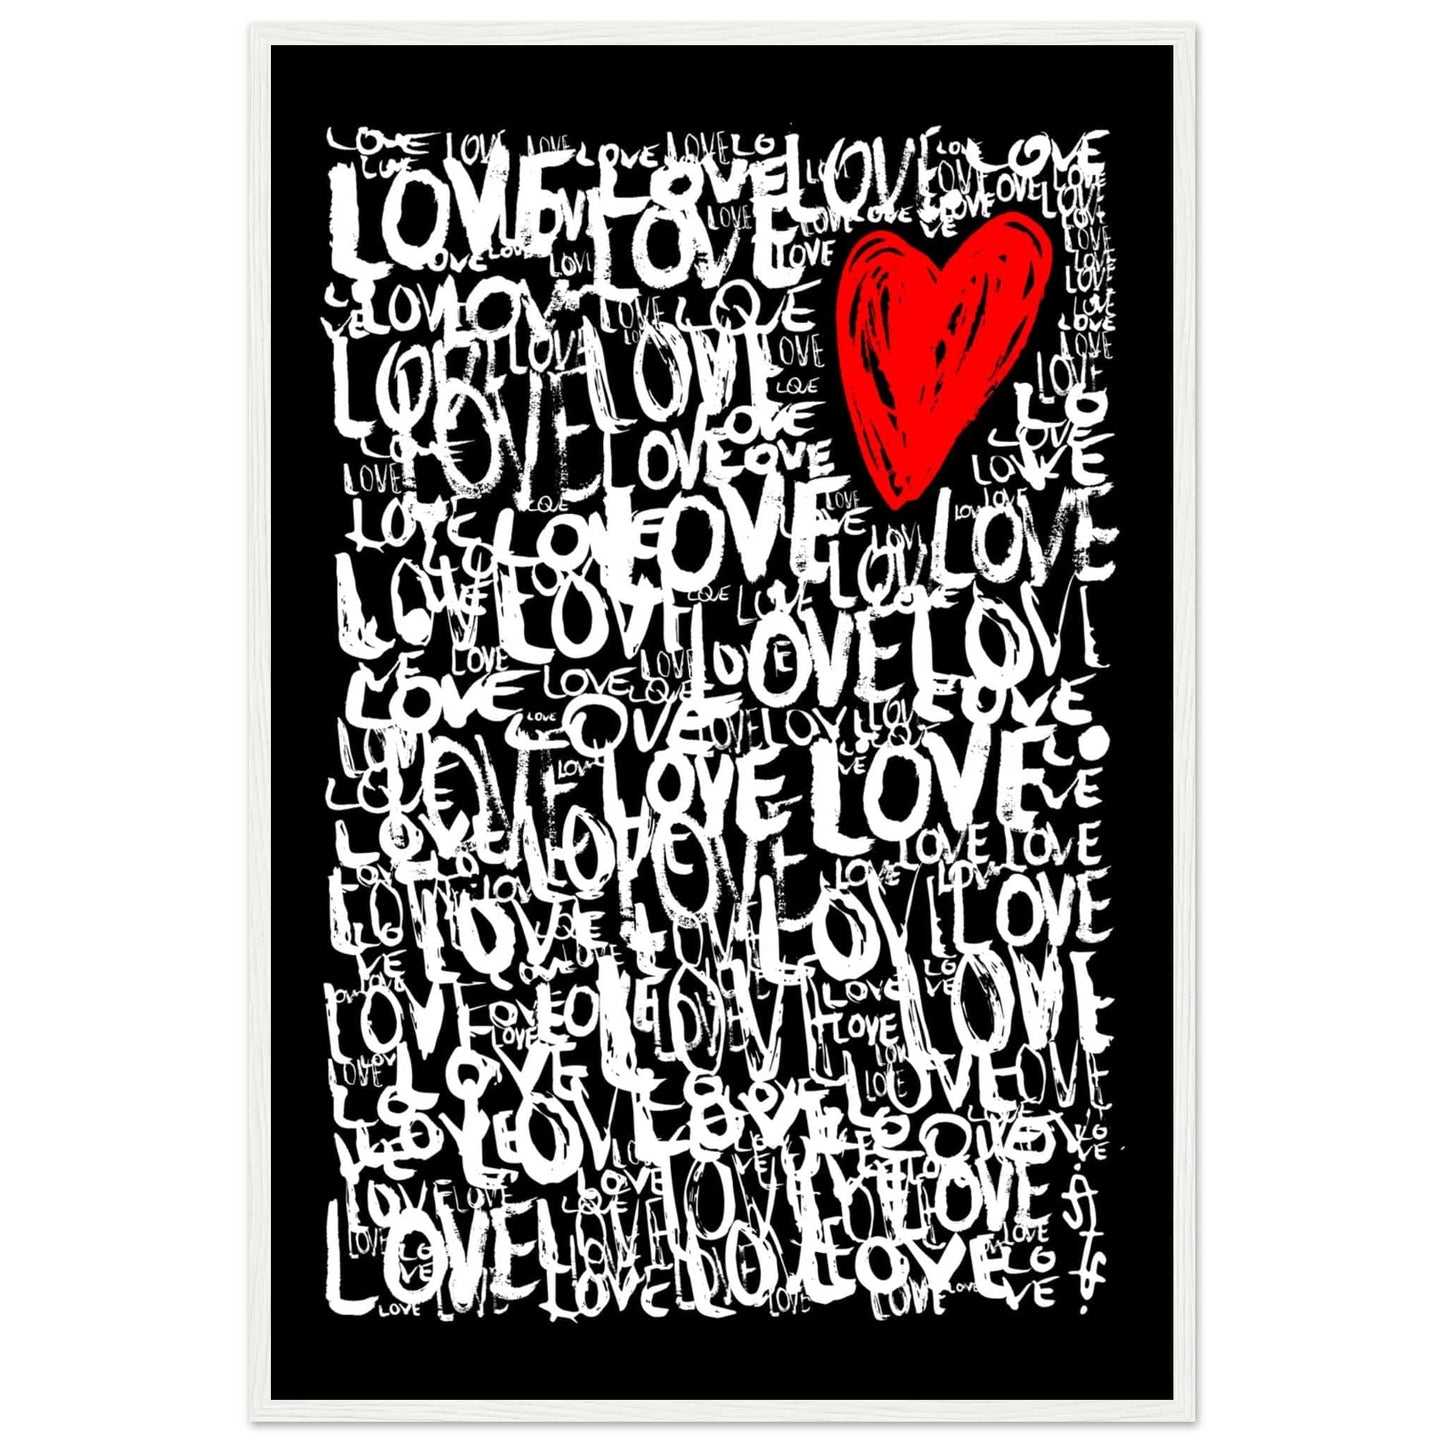 The Love - Abstract Typography Print (Black Edition) Art Prints 60x90 cm / 24x36″ / Premium Semi-Glossy Paper Poster